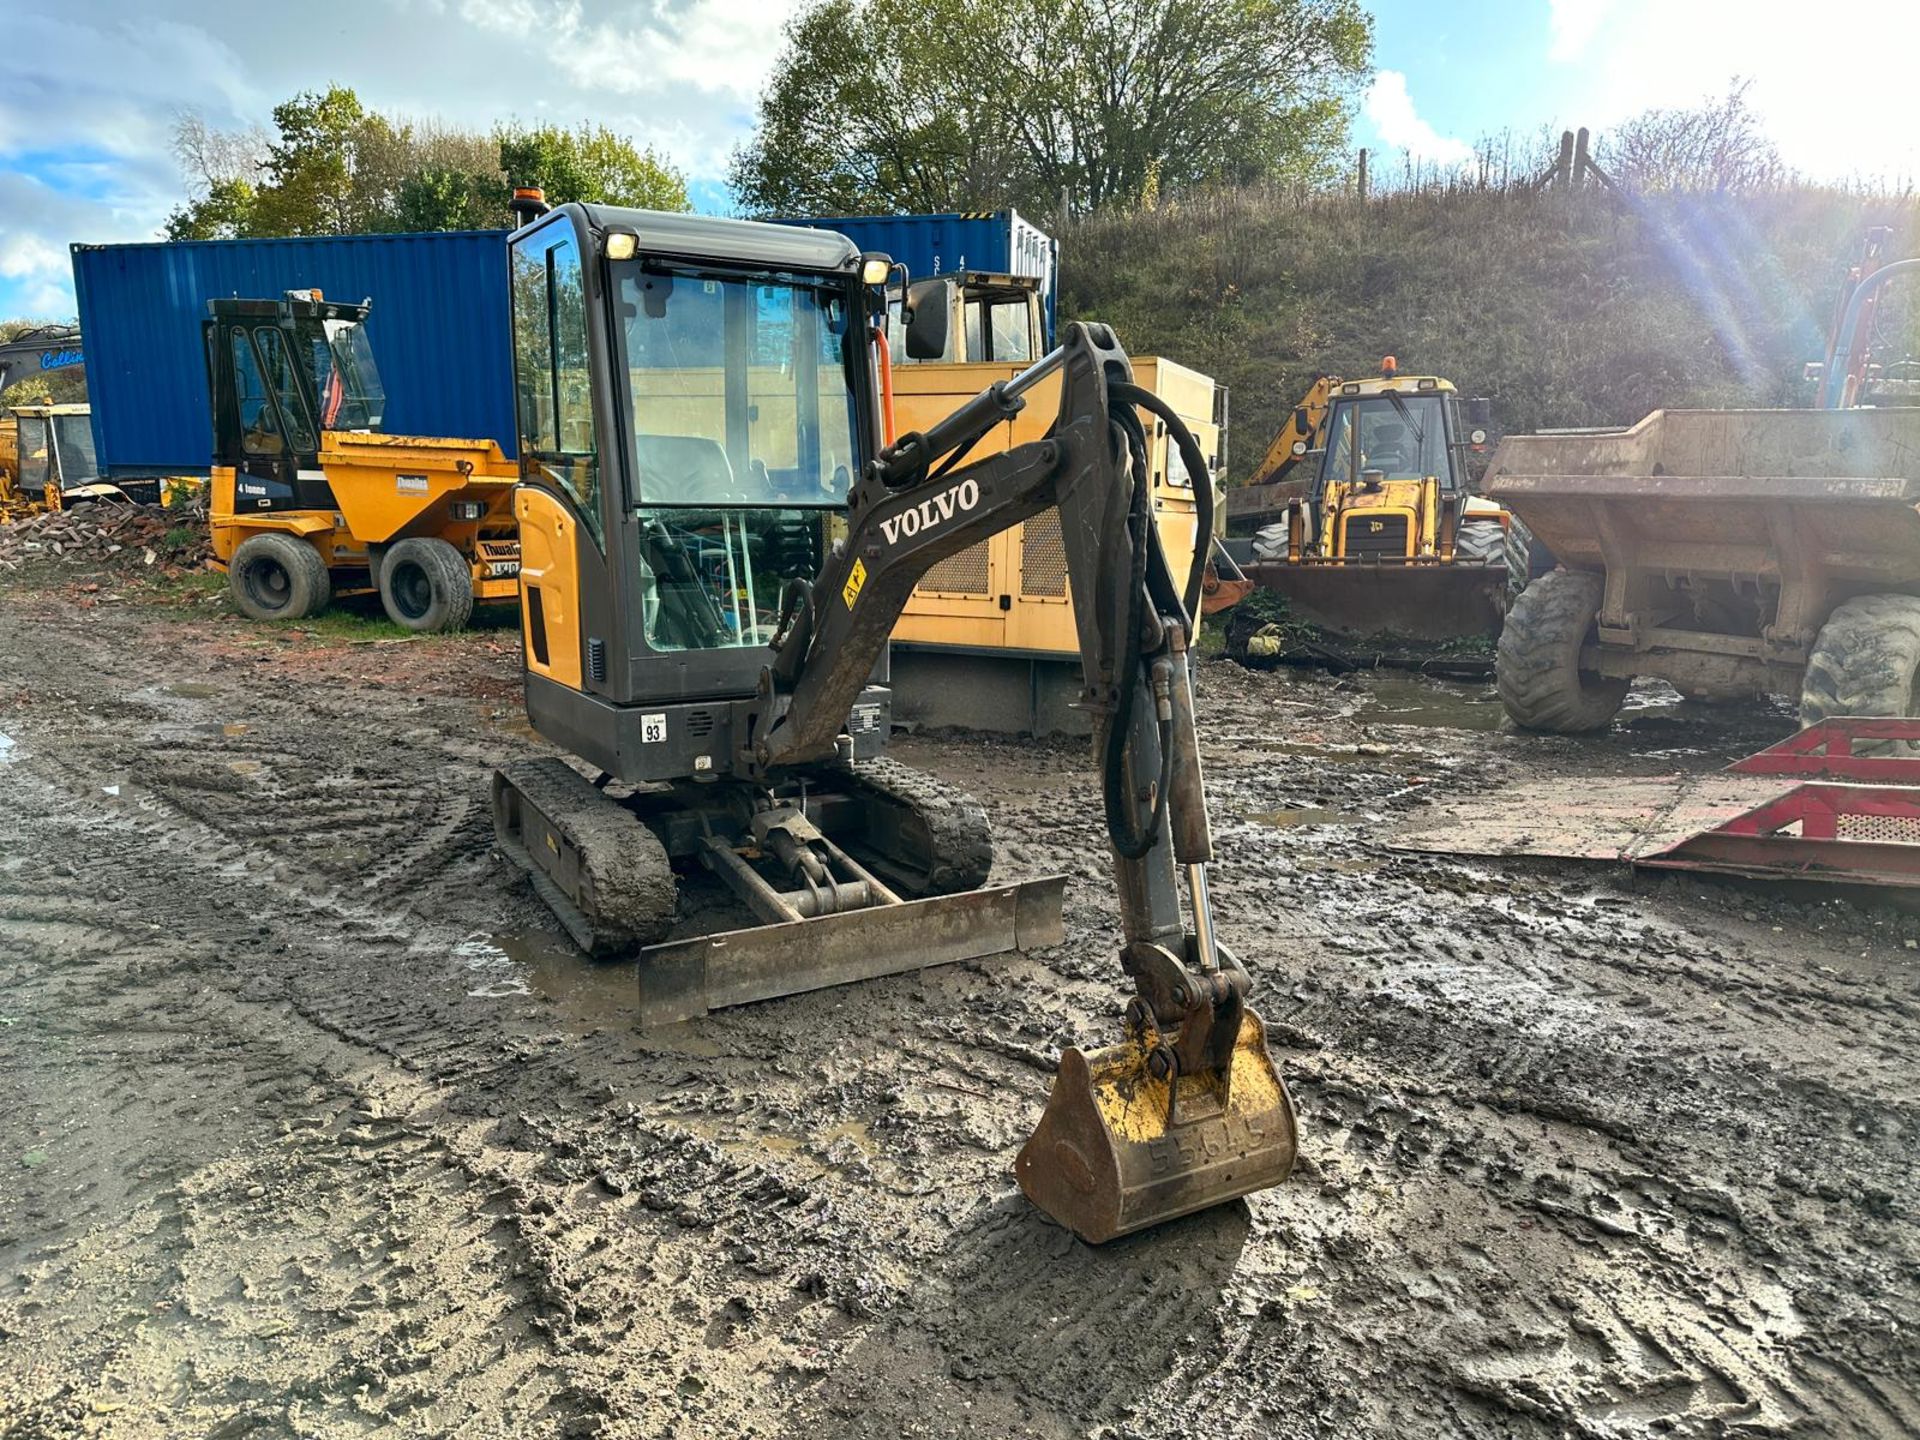 2018 VOLVO EC18E MINI EXCAVATOR - RUNS DRIVES AND WORKS WELL - SHOWING A LOW 1801 HOURS!  - Image 15 of 21